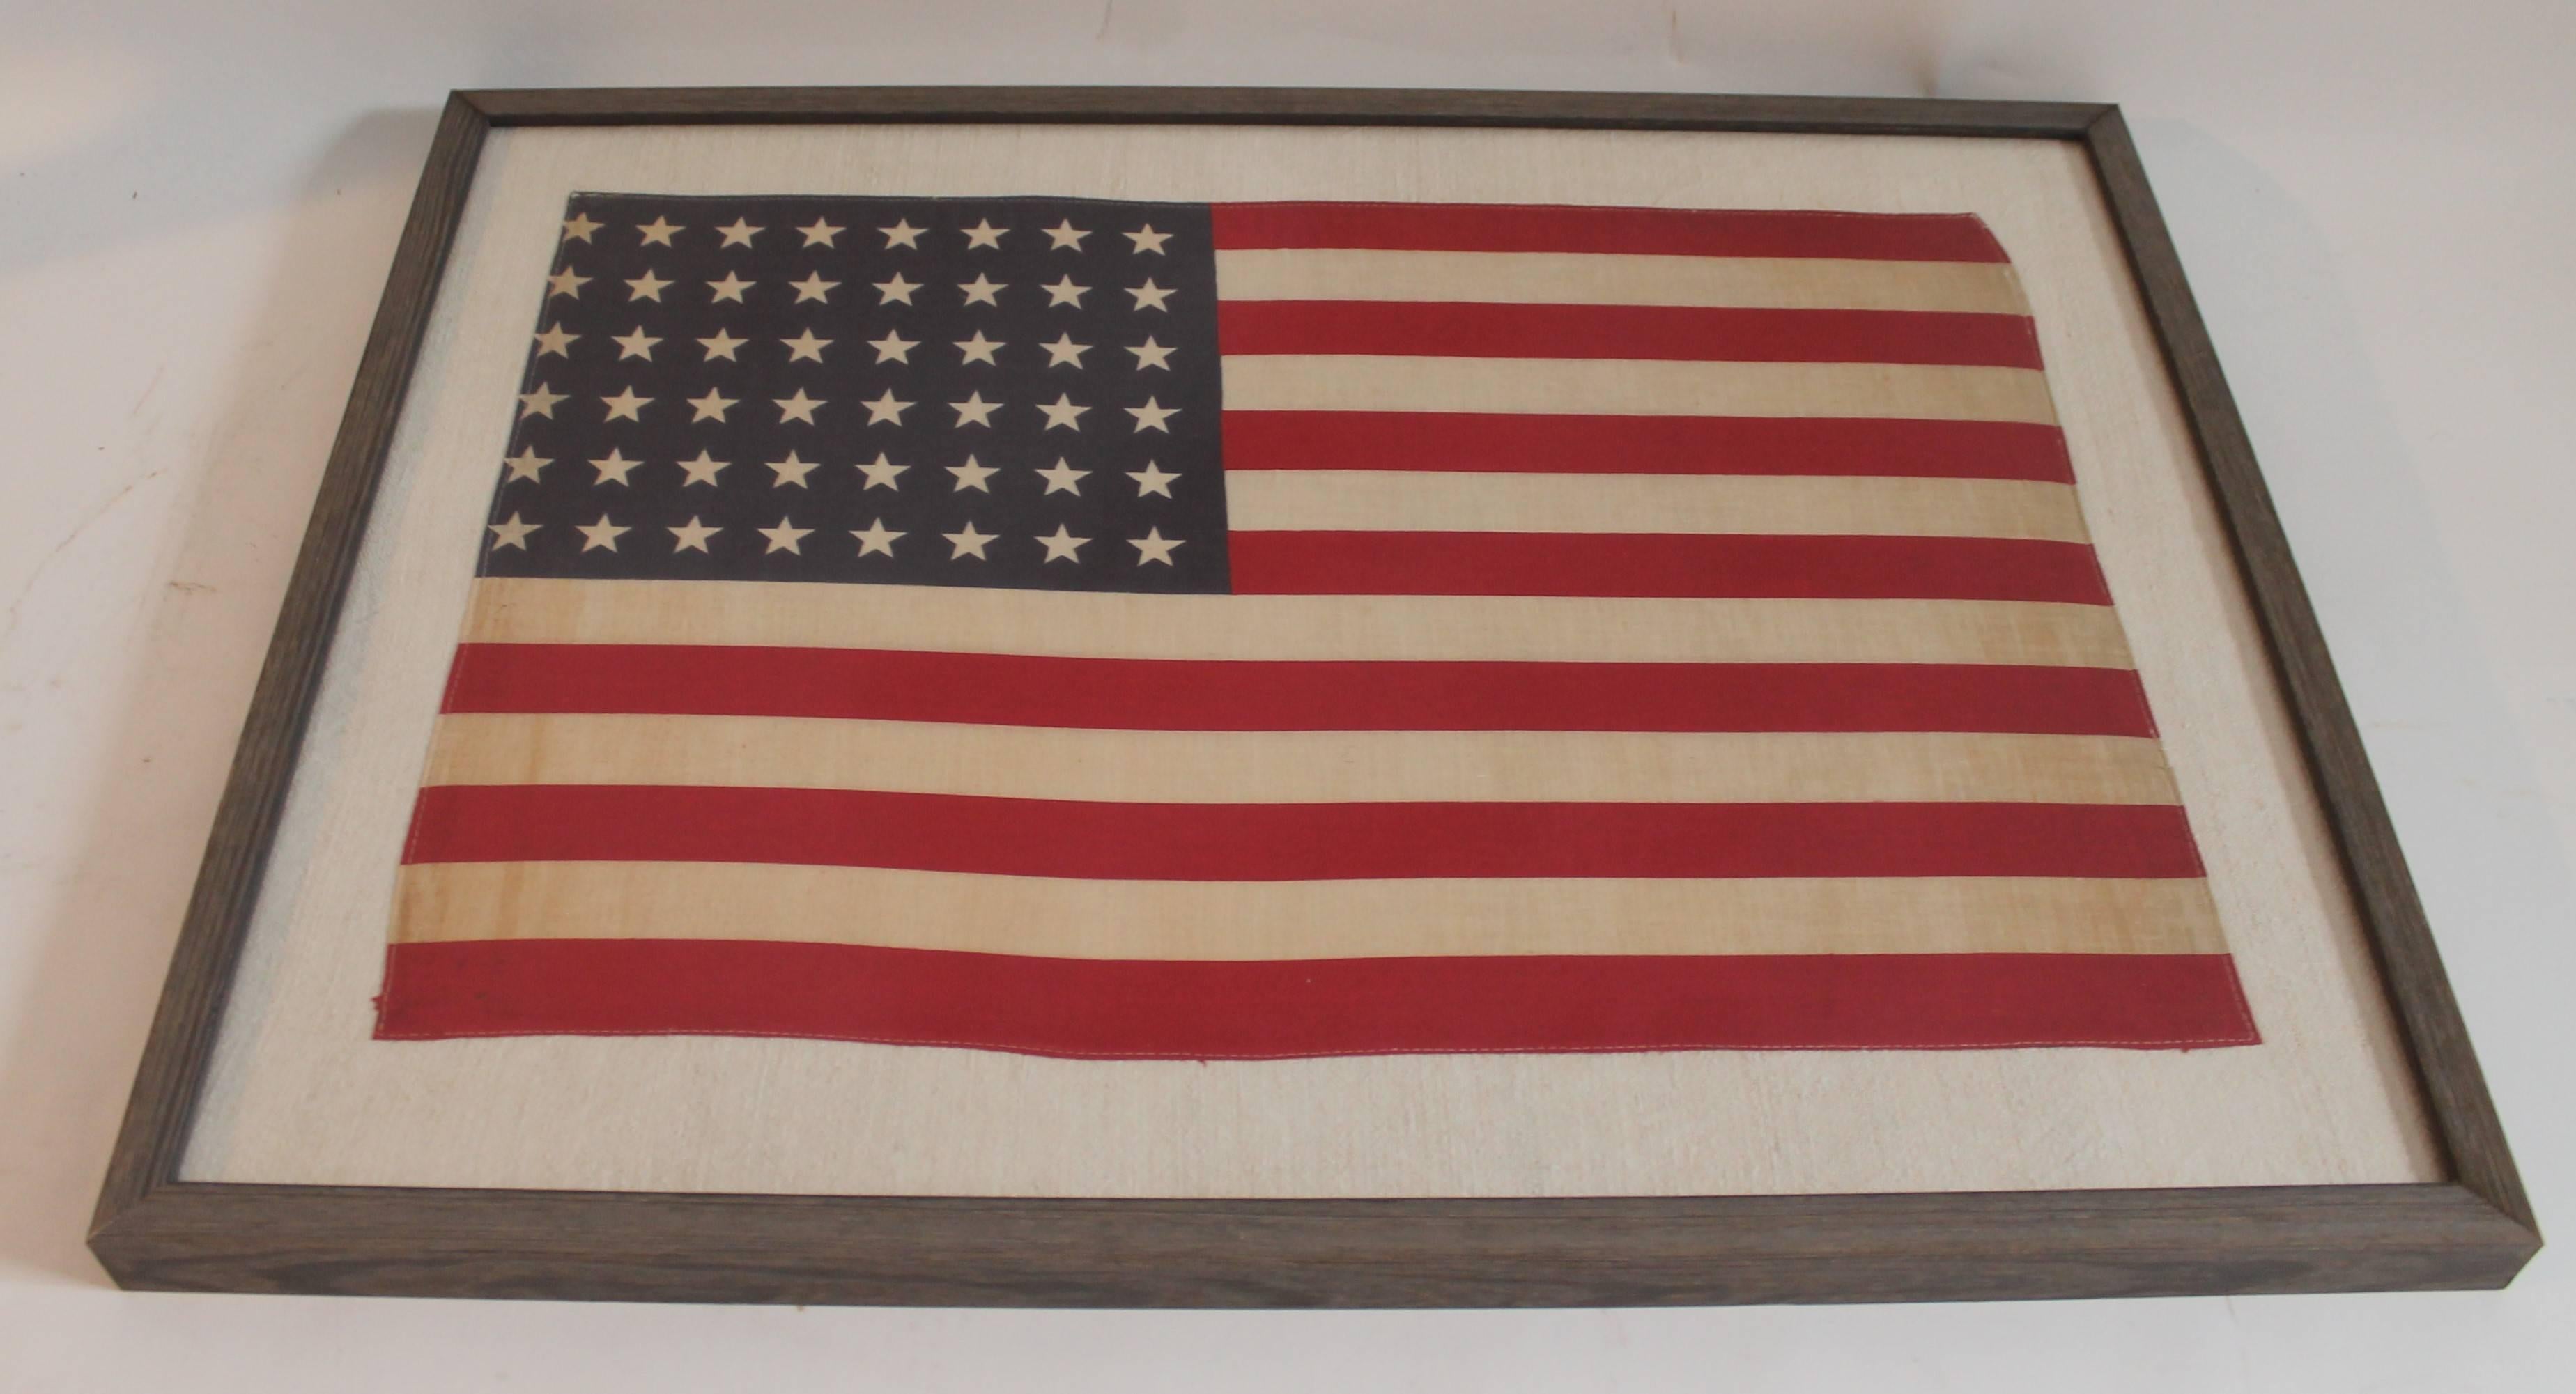 This 48 star flag is hand-sewn on cotton homespun linen and is in a country rustic wood frame. Great for in a den or bar. The condition of the flag is good with minor discoloration.